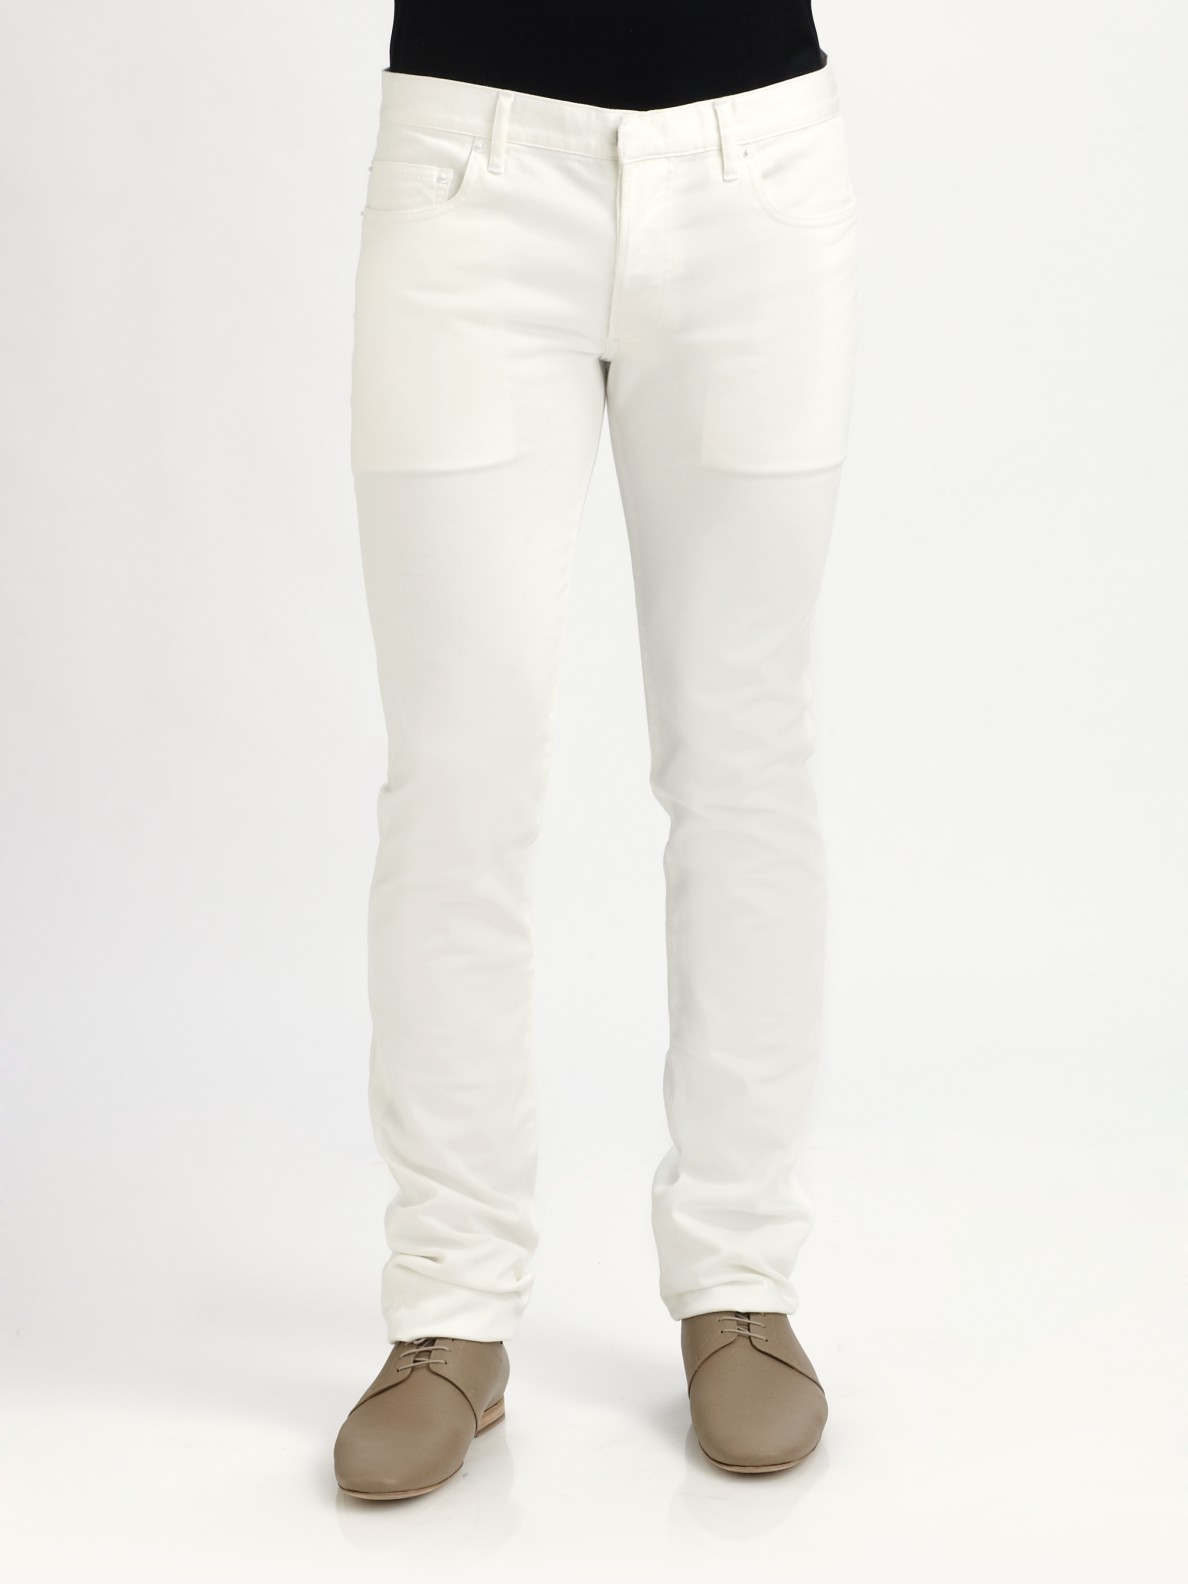 Dior Homme Slim-fit White Jeans for Men - Lyst